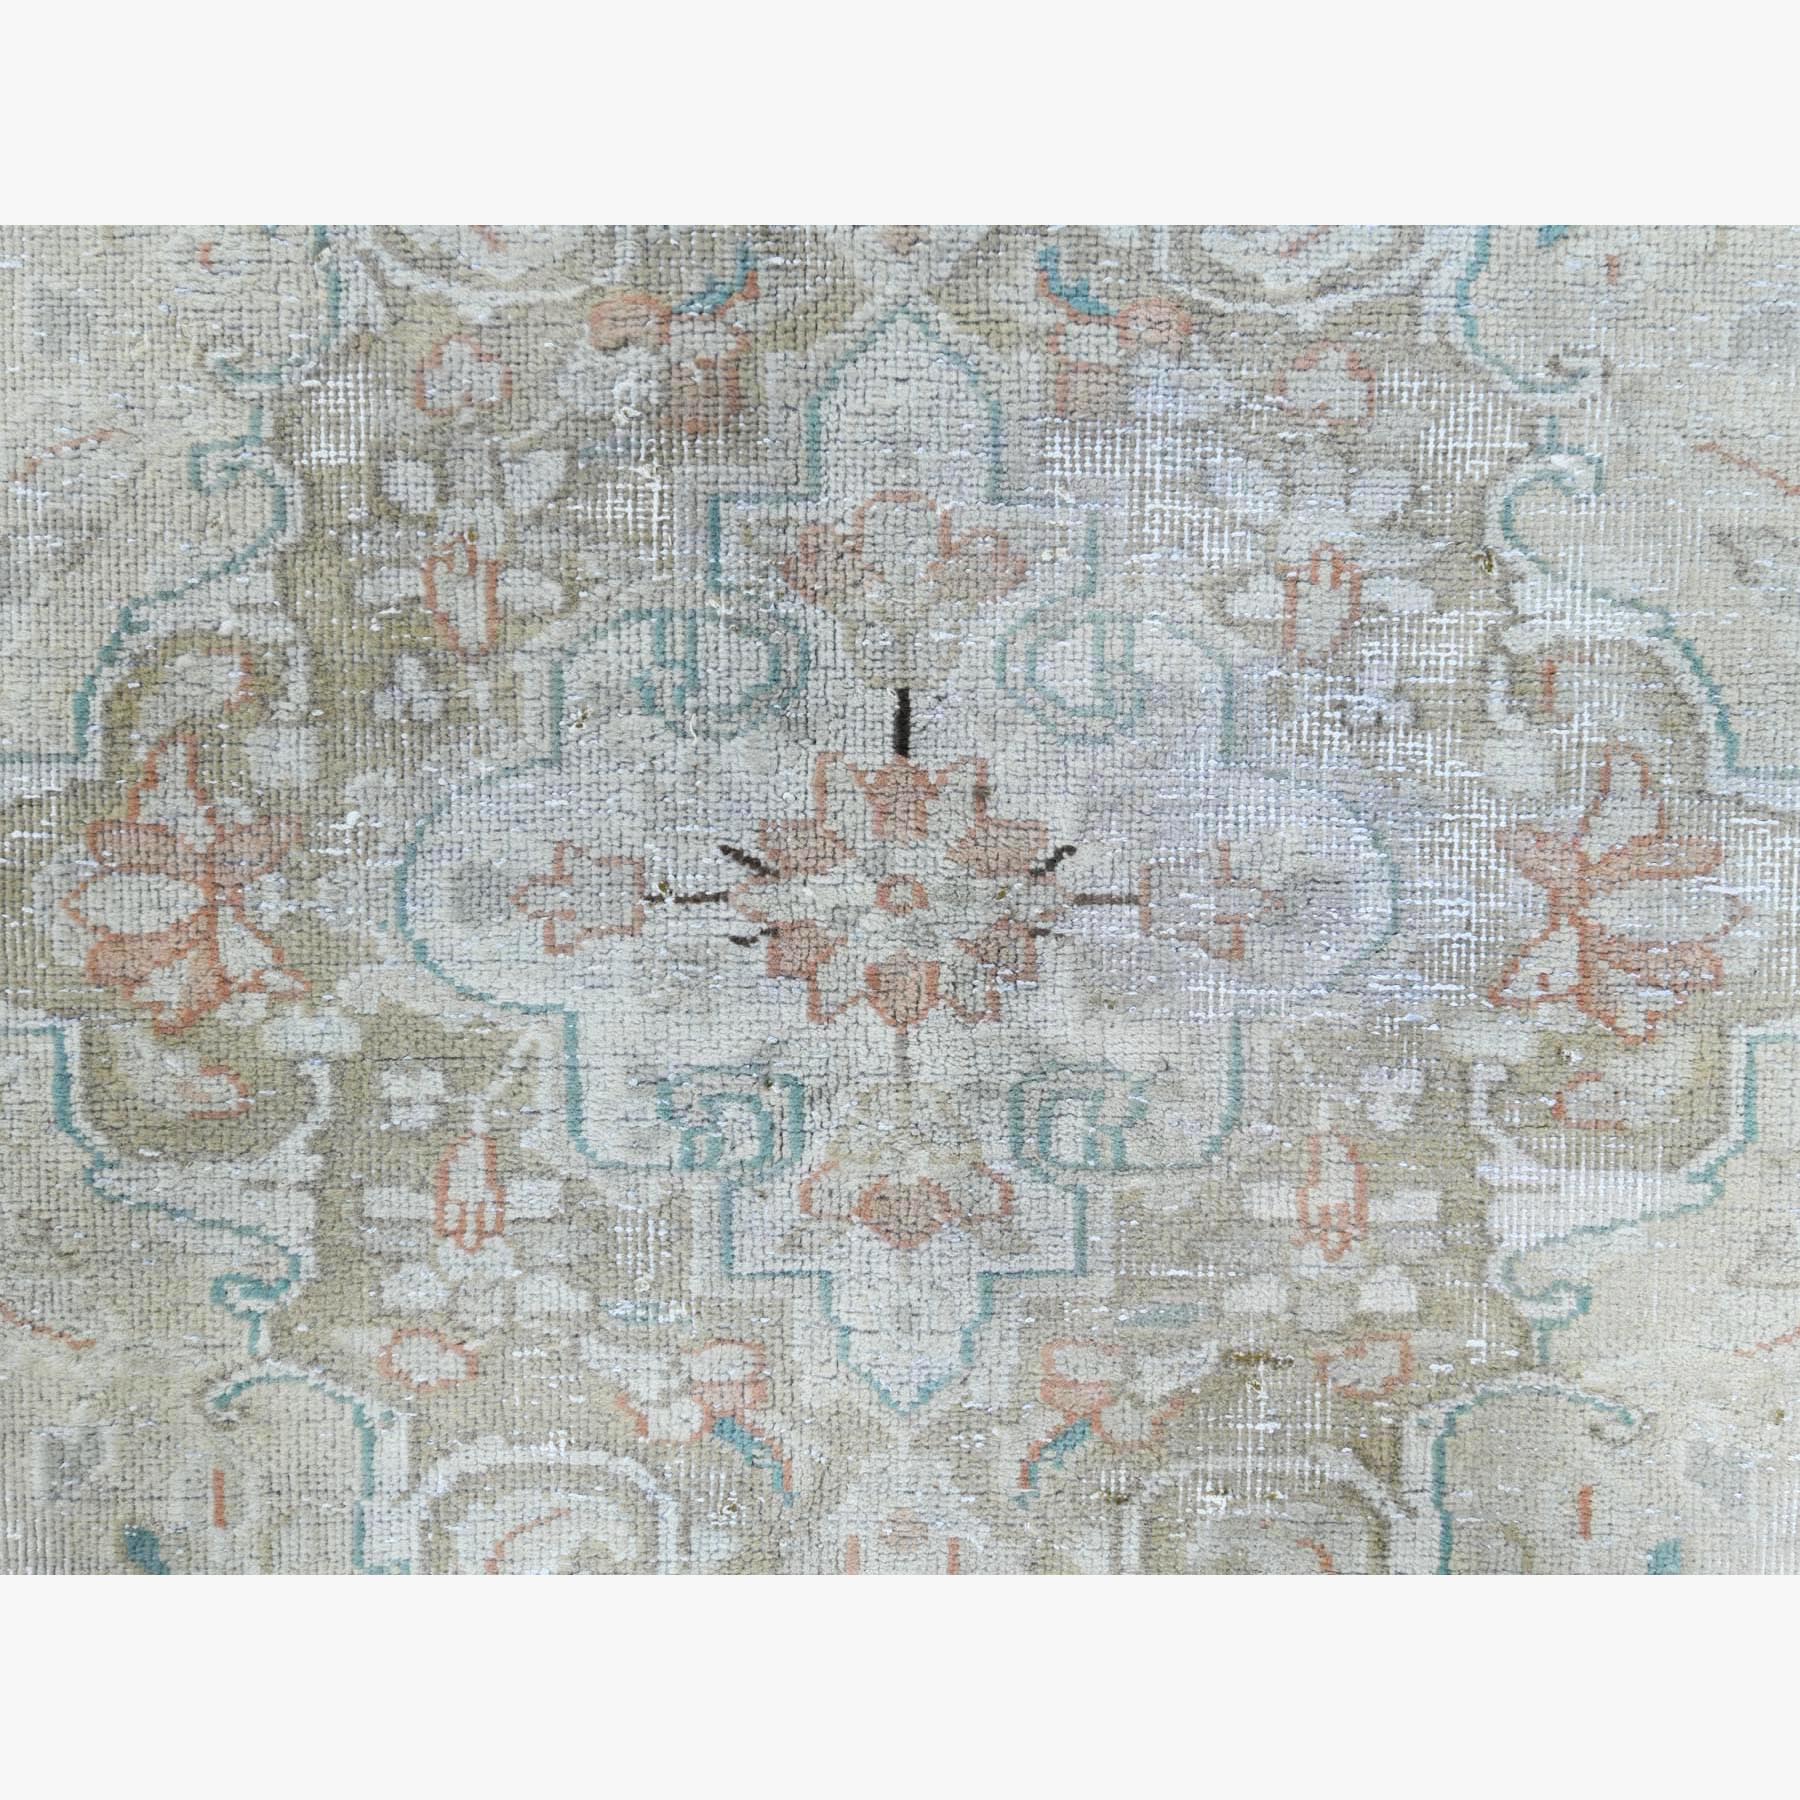 9'x10'5" Hand Woven Persian Kerman Vintage Clean Pure Wool Sheared Low Beige Washed Out Oriental Rug 